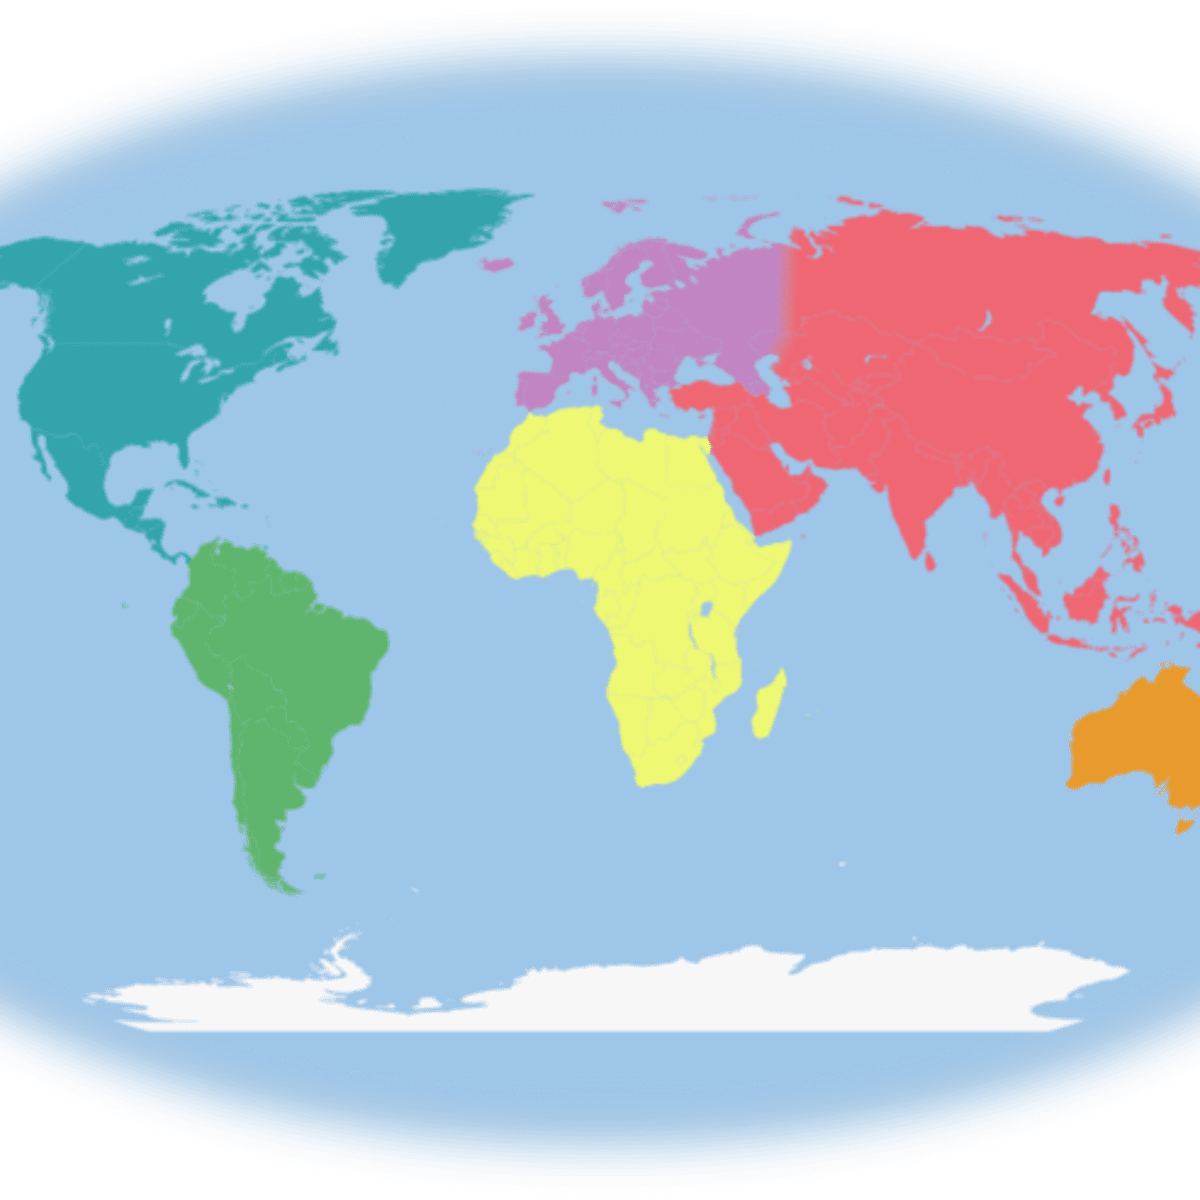 world map continents and oceans for kids